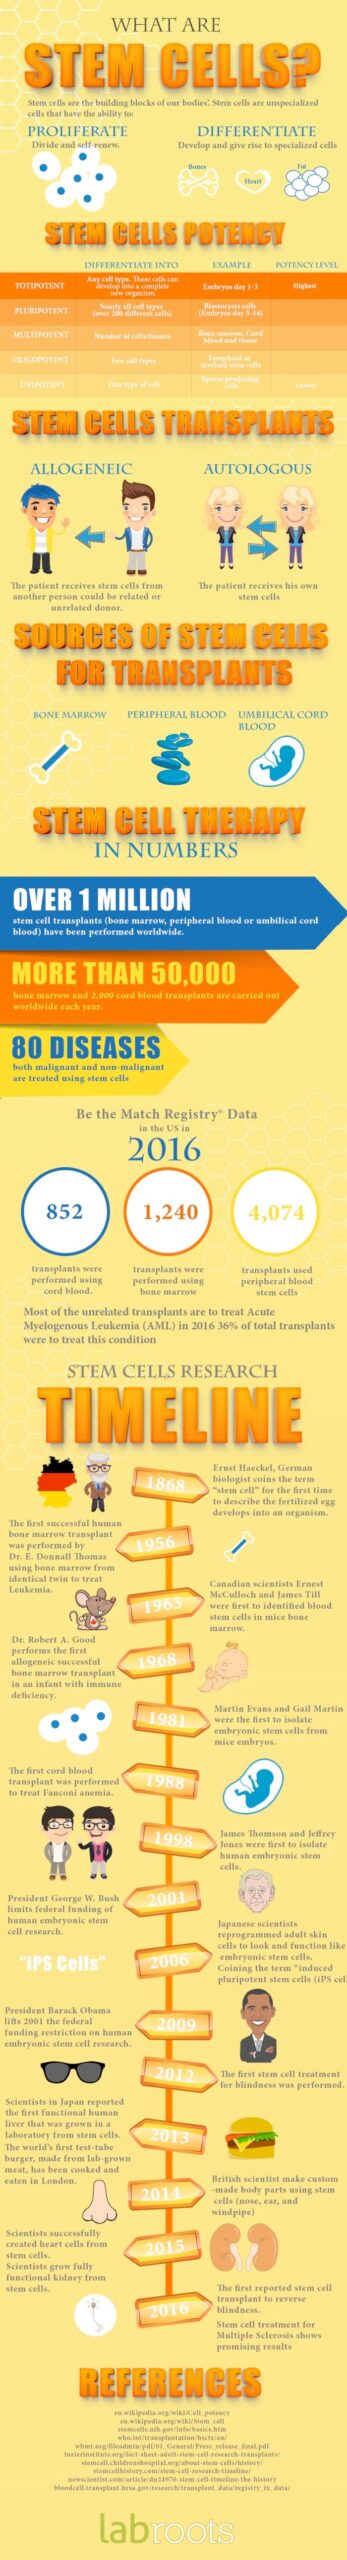 Stem cells infographic | Science on Cells | Pinterest | Infographic, School and Ap biology